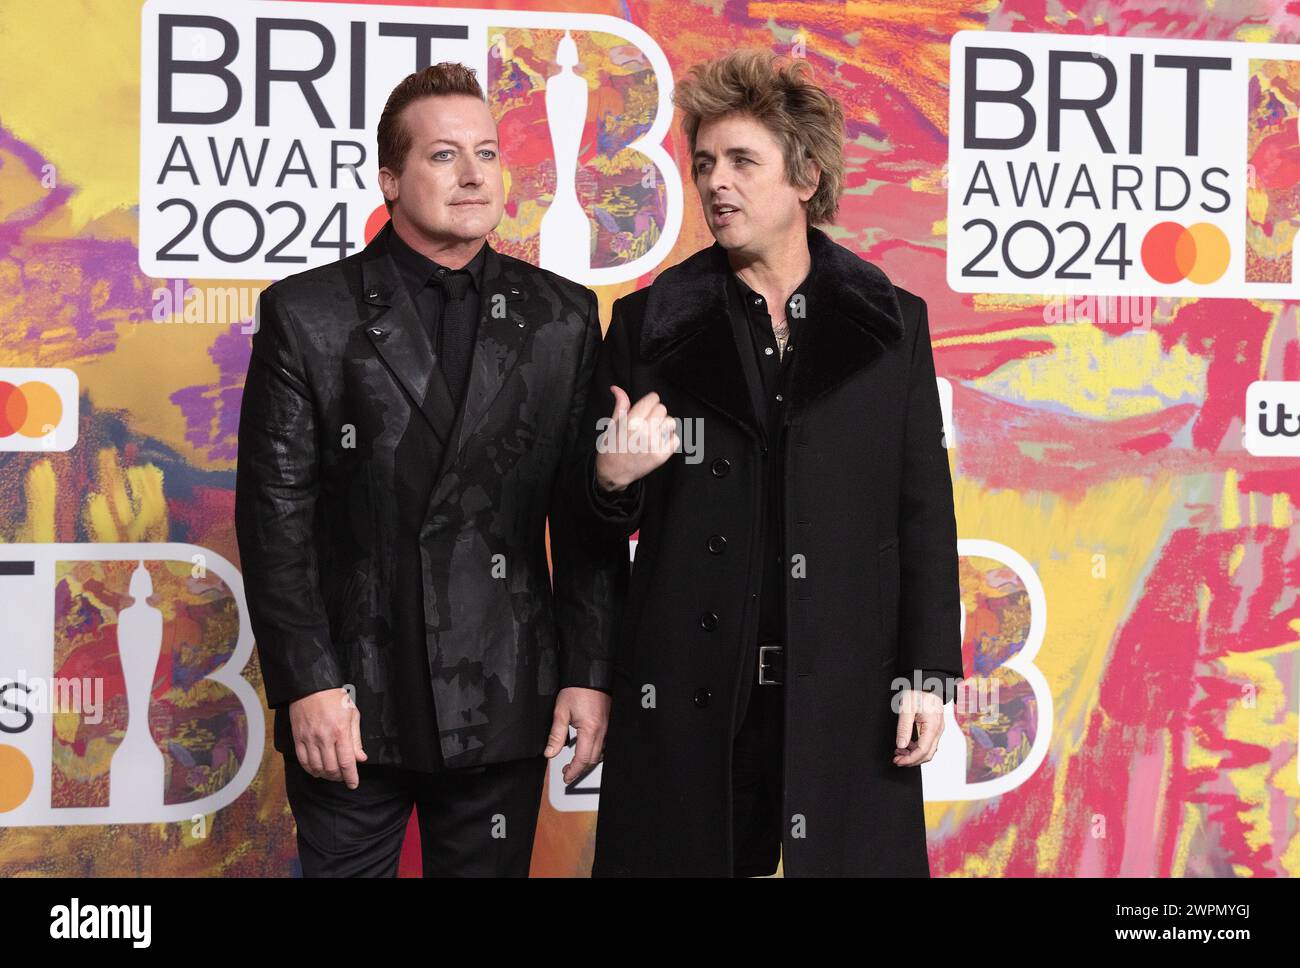 London, UK. March 2nd, 2024.   (EDITORIAL USE ONLY. NO PUBLICATIONS DEVOTED EXCLUSIVELY TO THE ARTIST) Tré Cool and Billie Joe Armstrong of Green Day attends the BRIT Awards 2024 at The O2 Arena on March 02, 2024 in London, England. Credit: S.A.M./Alamy Live News Stock Photo